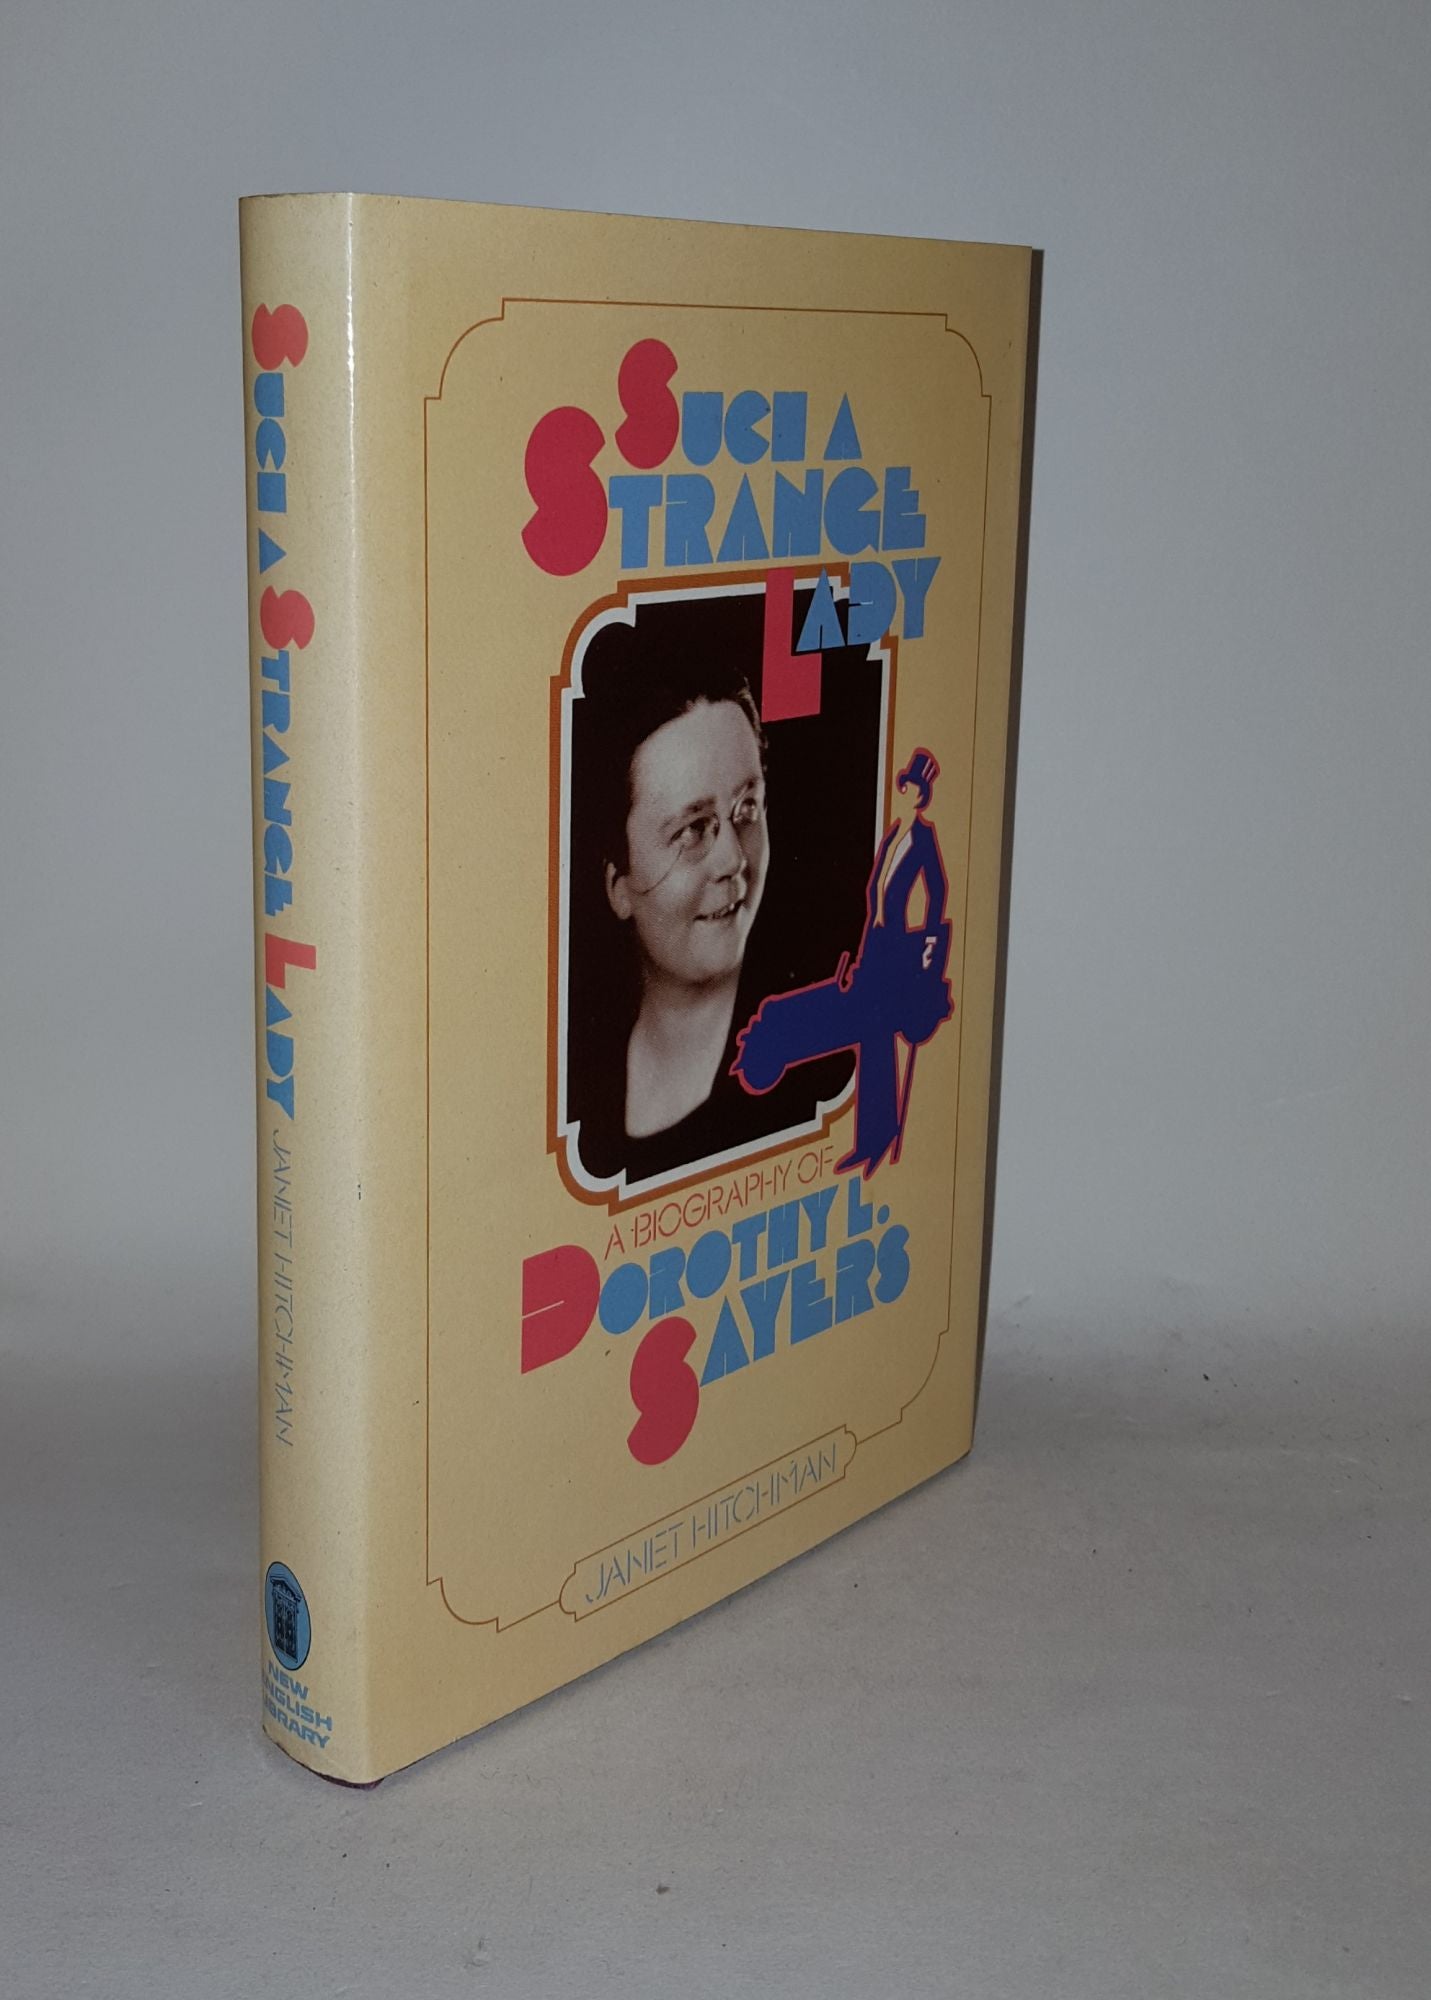 HITCHMAN Janet - Such a Strange Lady a Biography of Dorothy L. Sayers